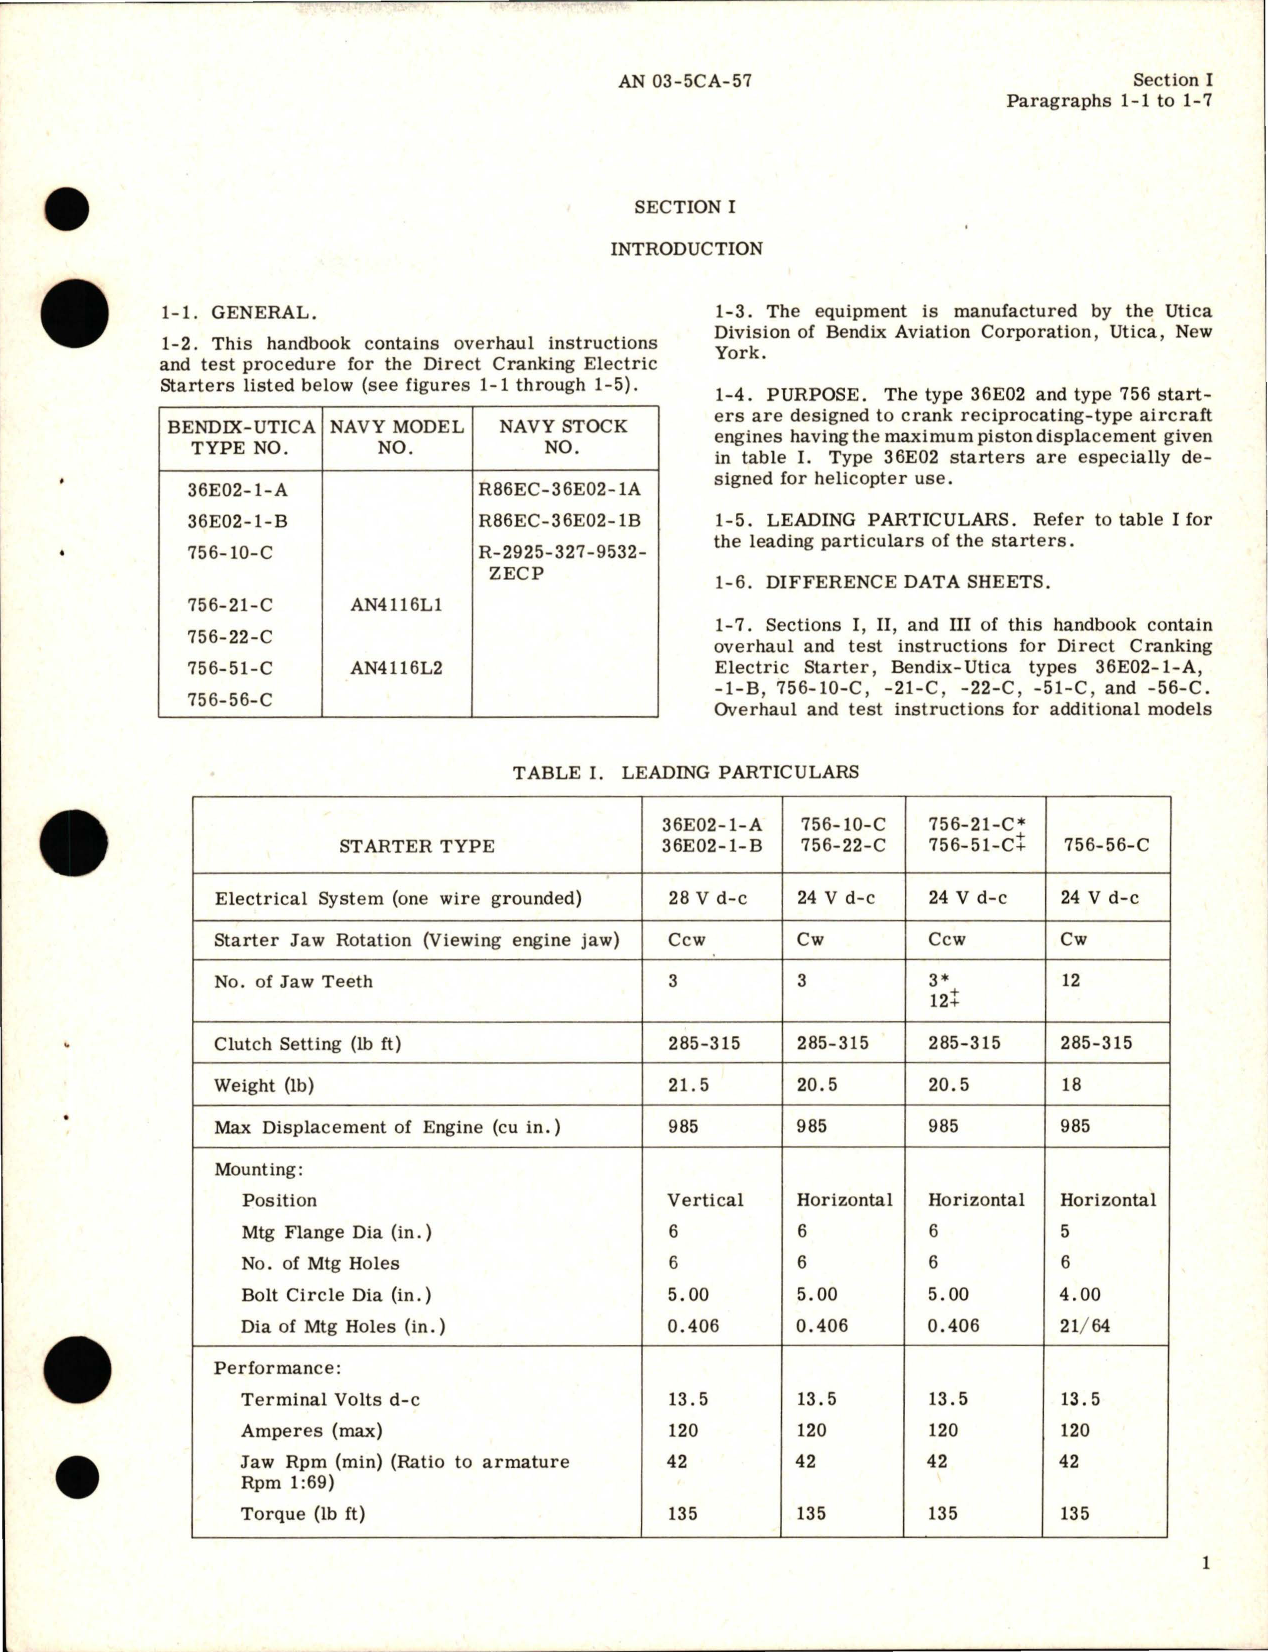 Sample page 5 from AirCorps Library document: Overhaul Instructions for Direct Cranking Electric Starters 